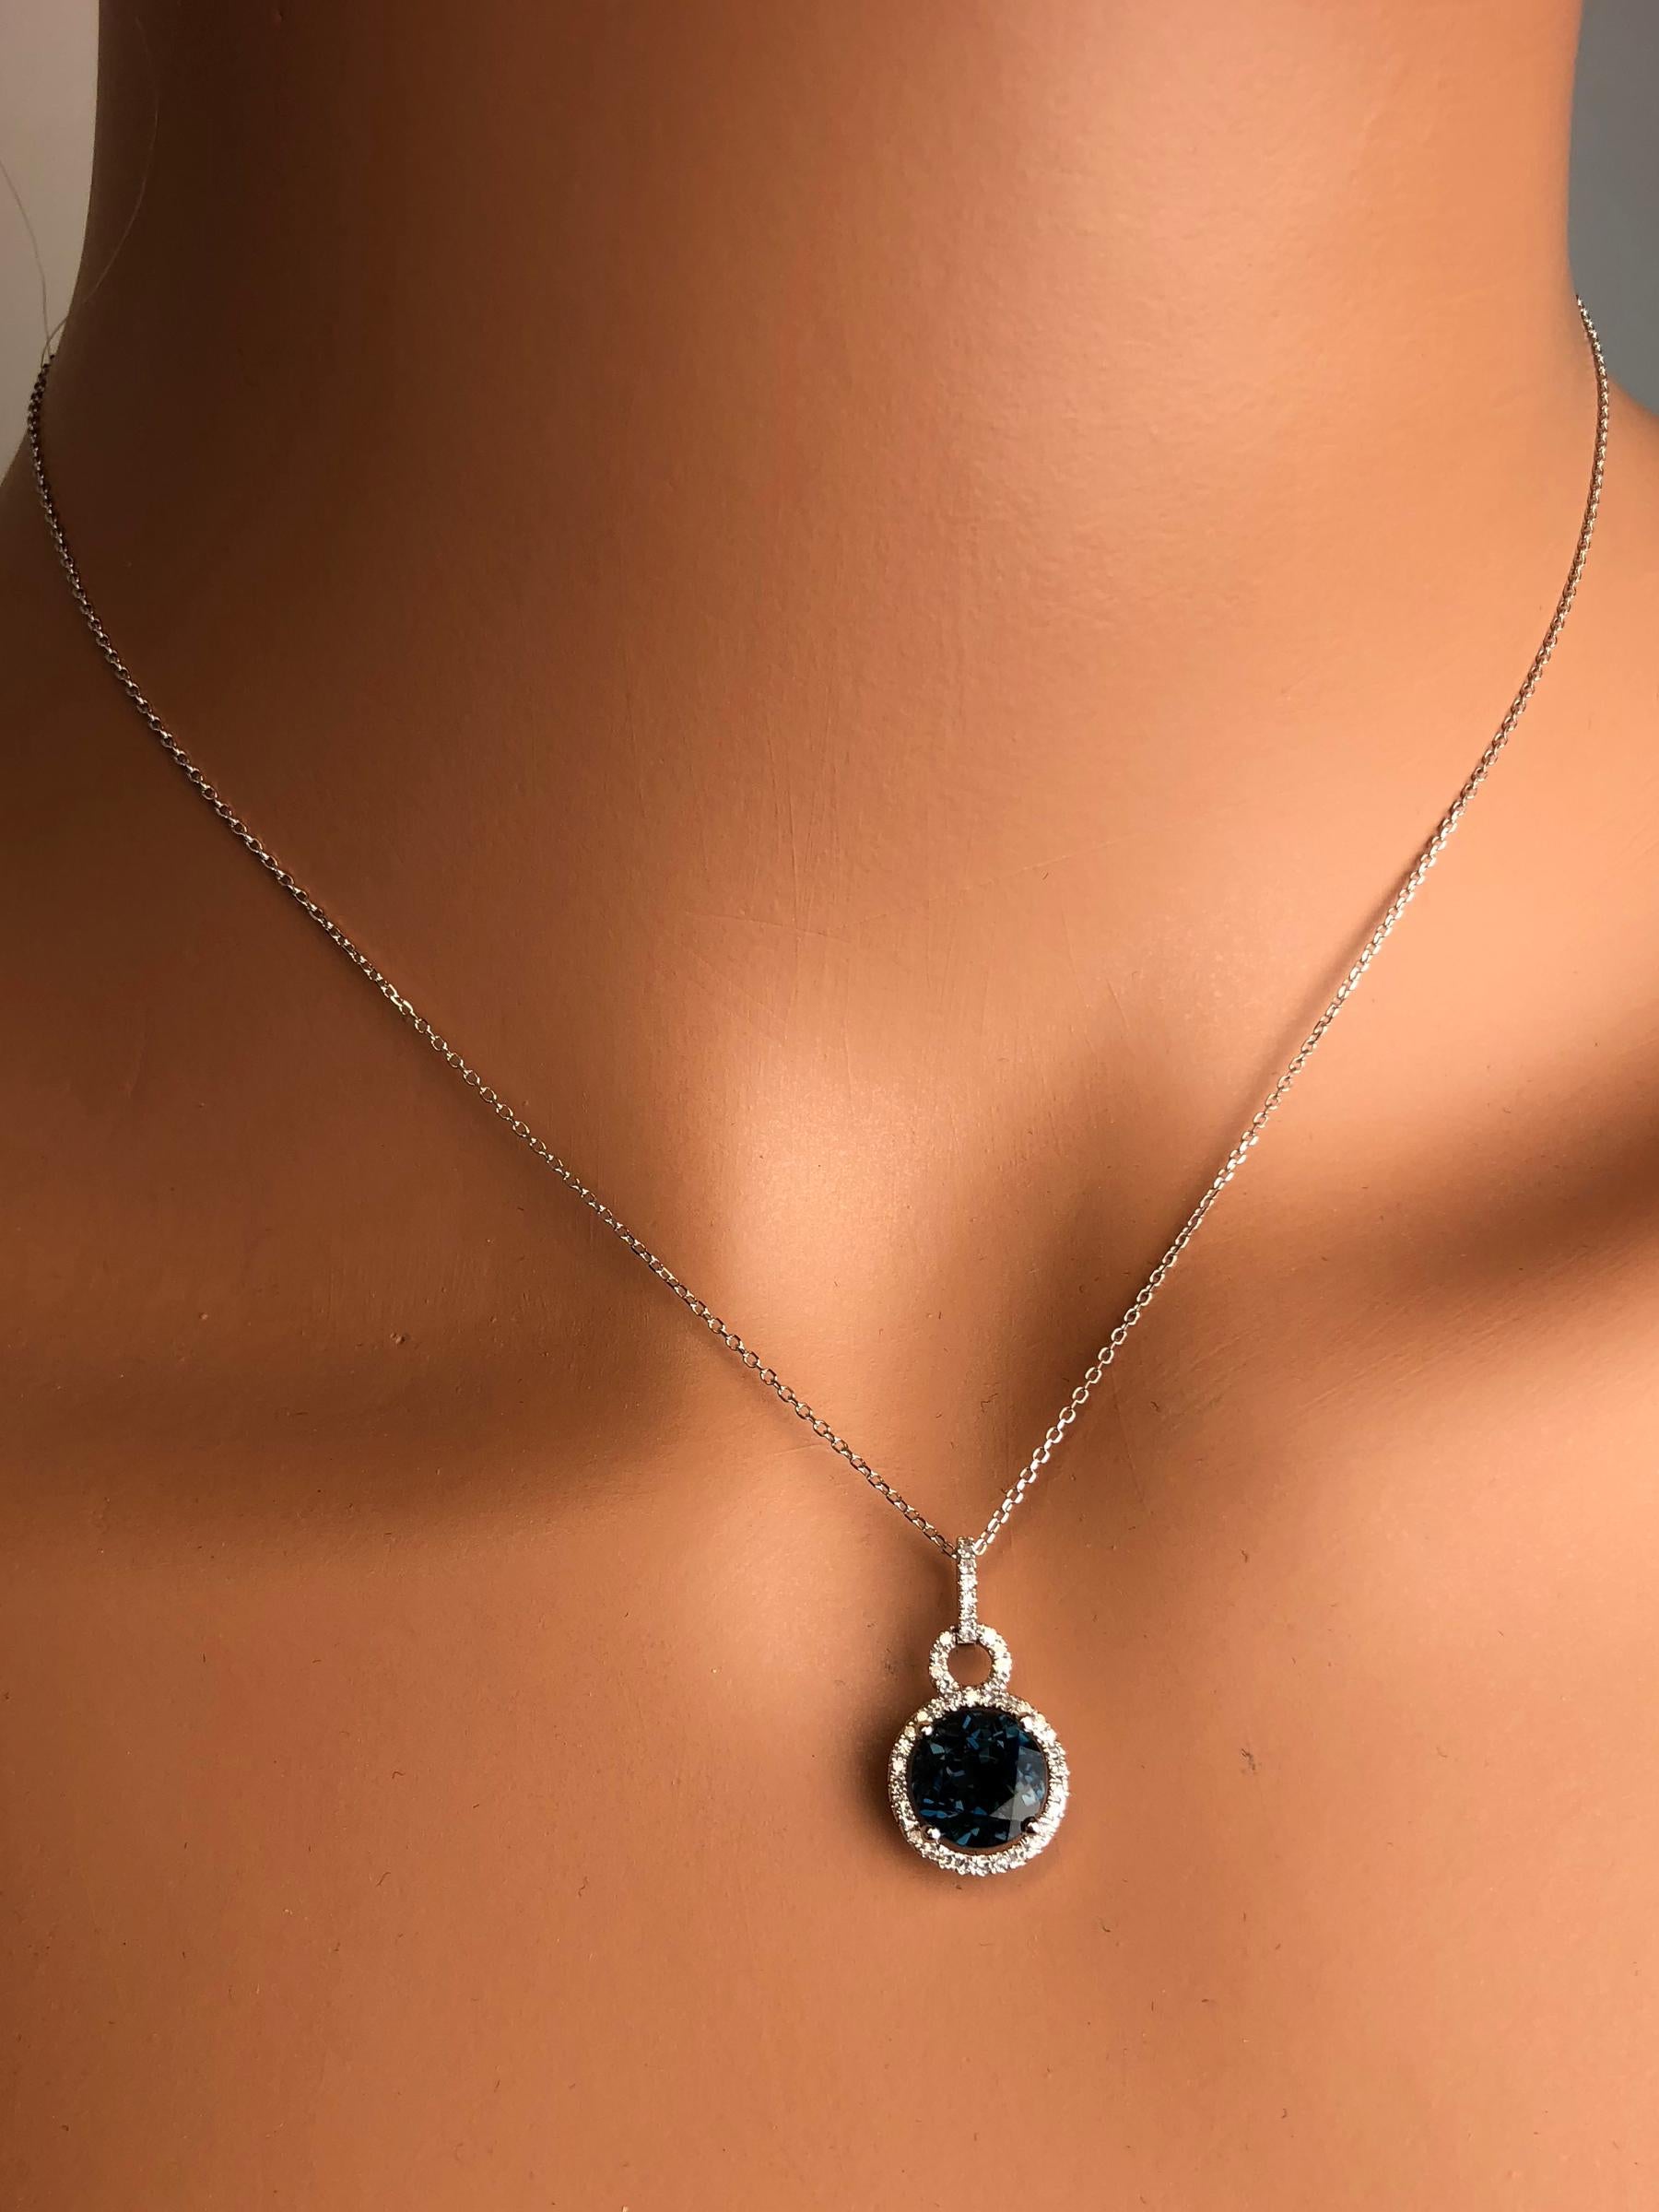 This lovely halo pendant features 2.45 carats round cut London Blue Topaz, surrounded by a halo of round white diamonds. Additional diamonds decorate the bail.

Center: 2.45 carat round cut London Blue Topaz
Diamond Halo: 43 round diamonds total